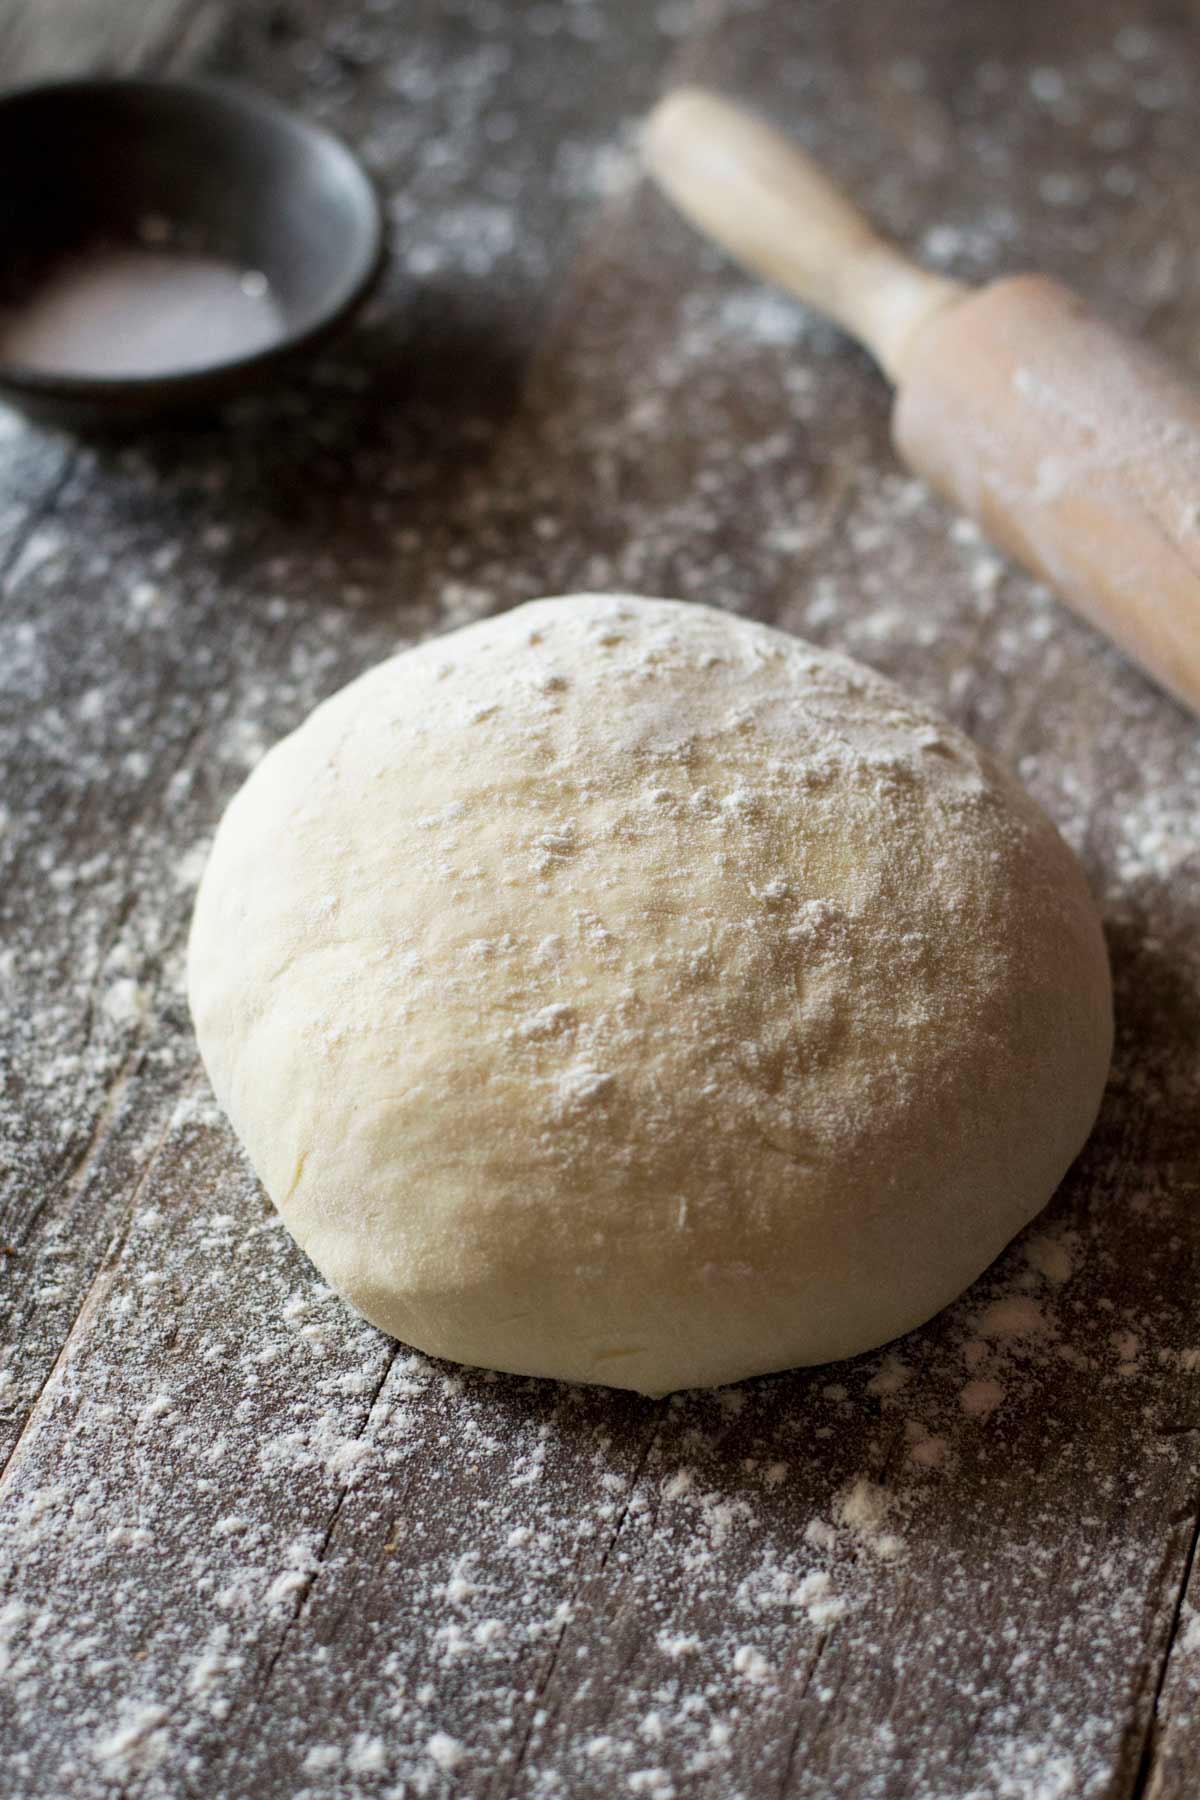 A ball of yeast free pizza dough on a wooden work surface